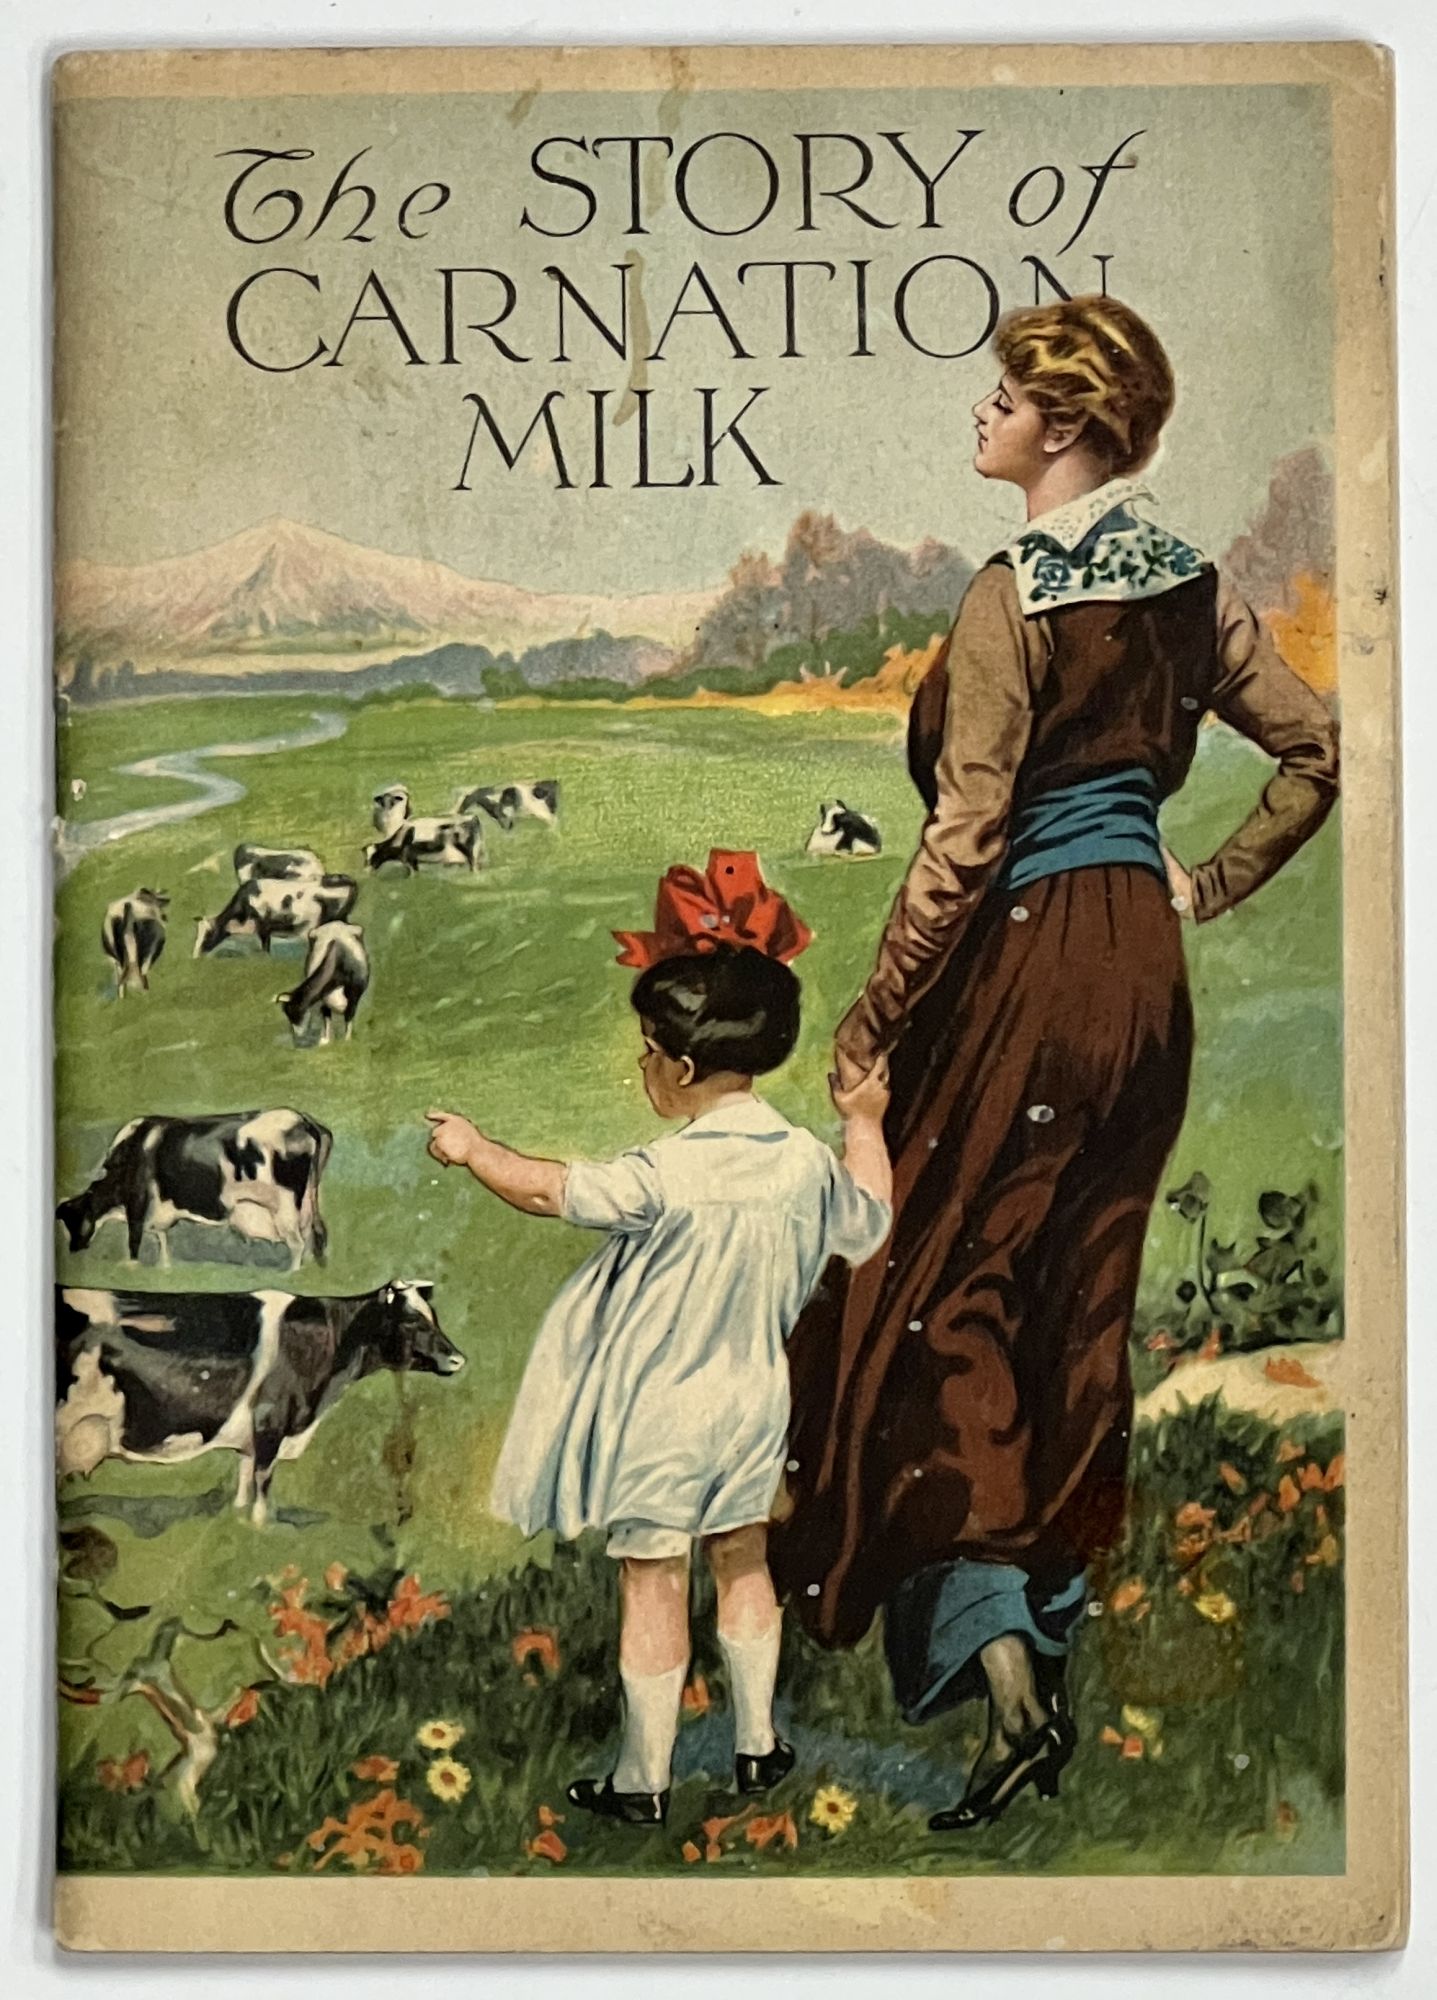 [Cookery] - The STORY Of CARNATION MILK